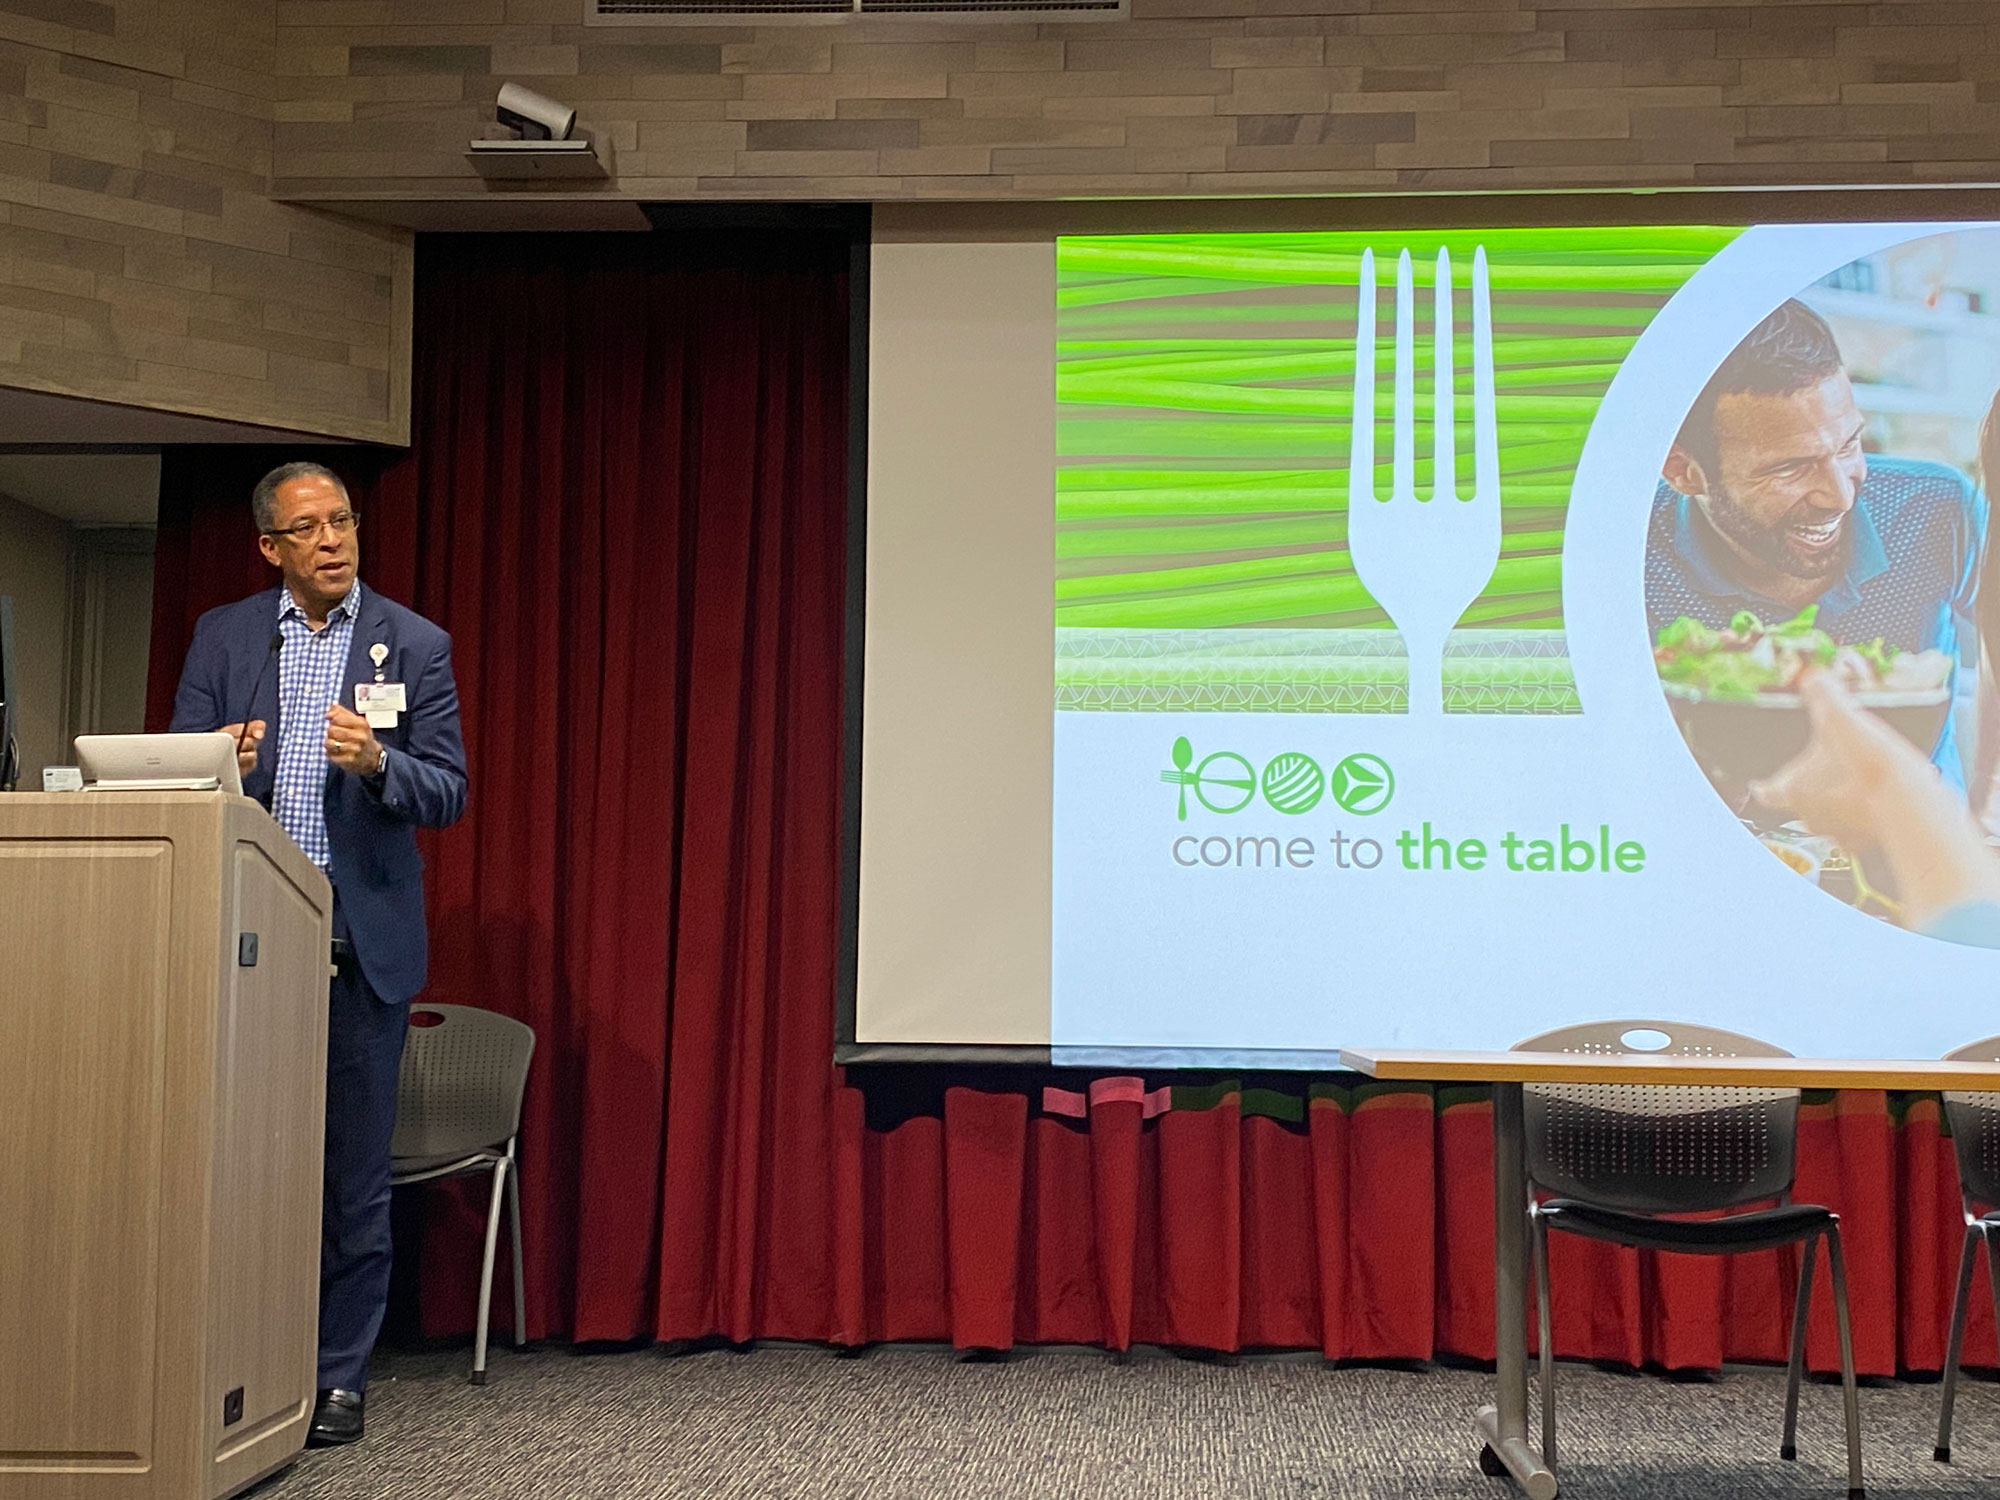 Alonzo Lewis, President of Trinity Health Ann Arbor, standing at a podium giving a presentation. To their left is an image on a screen that reads “come to the table”